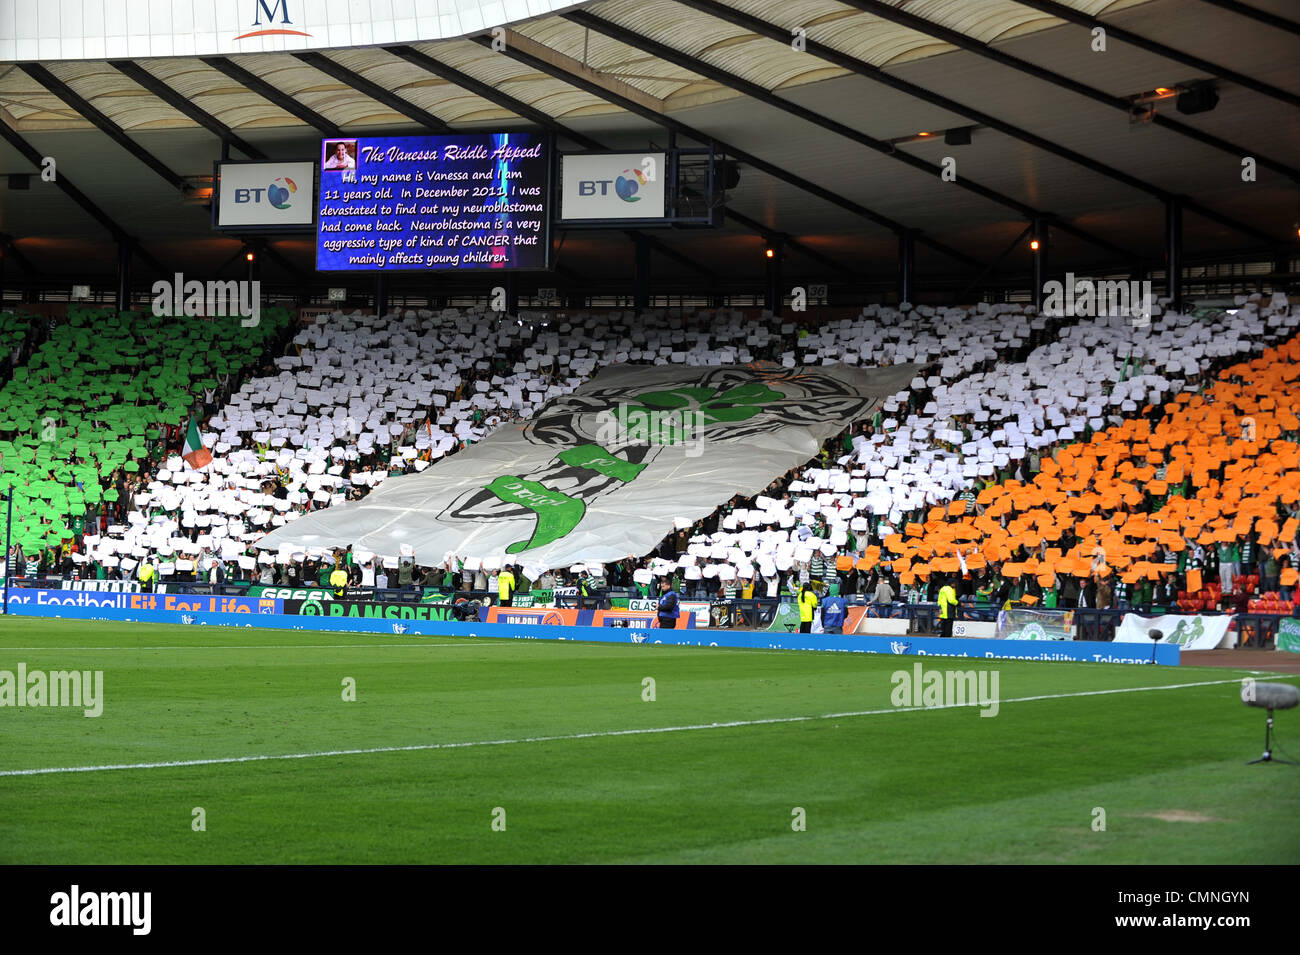 Celtic fans tifo display, with details of charity drive for the Vanessa Riddle appeal on the big screen, before League Cup Final Stock Photo